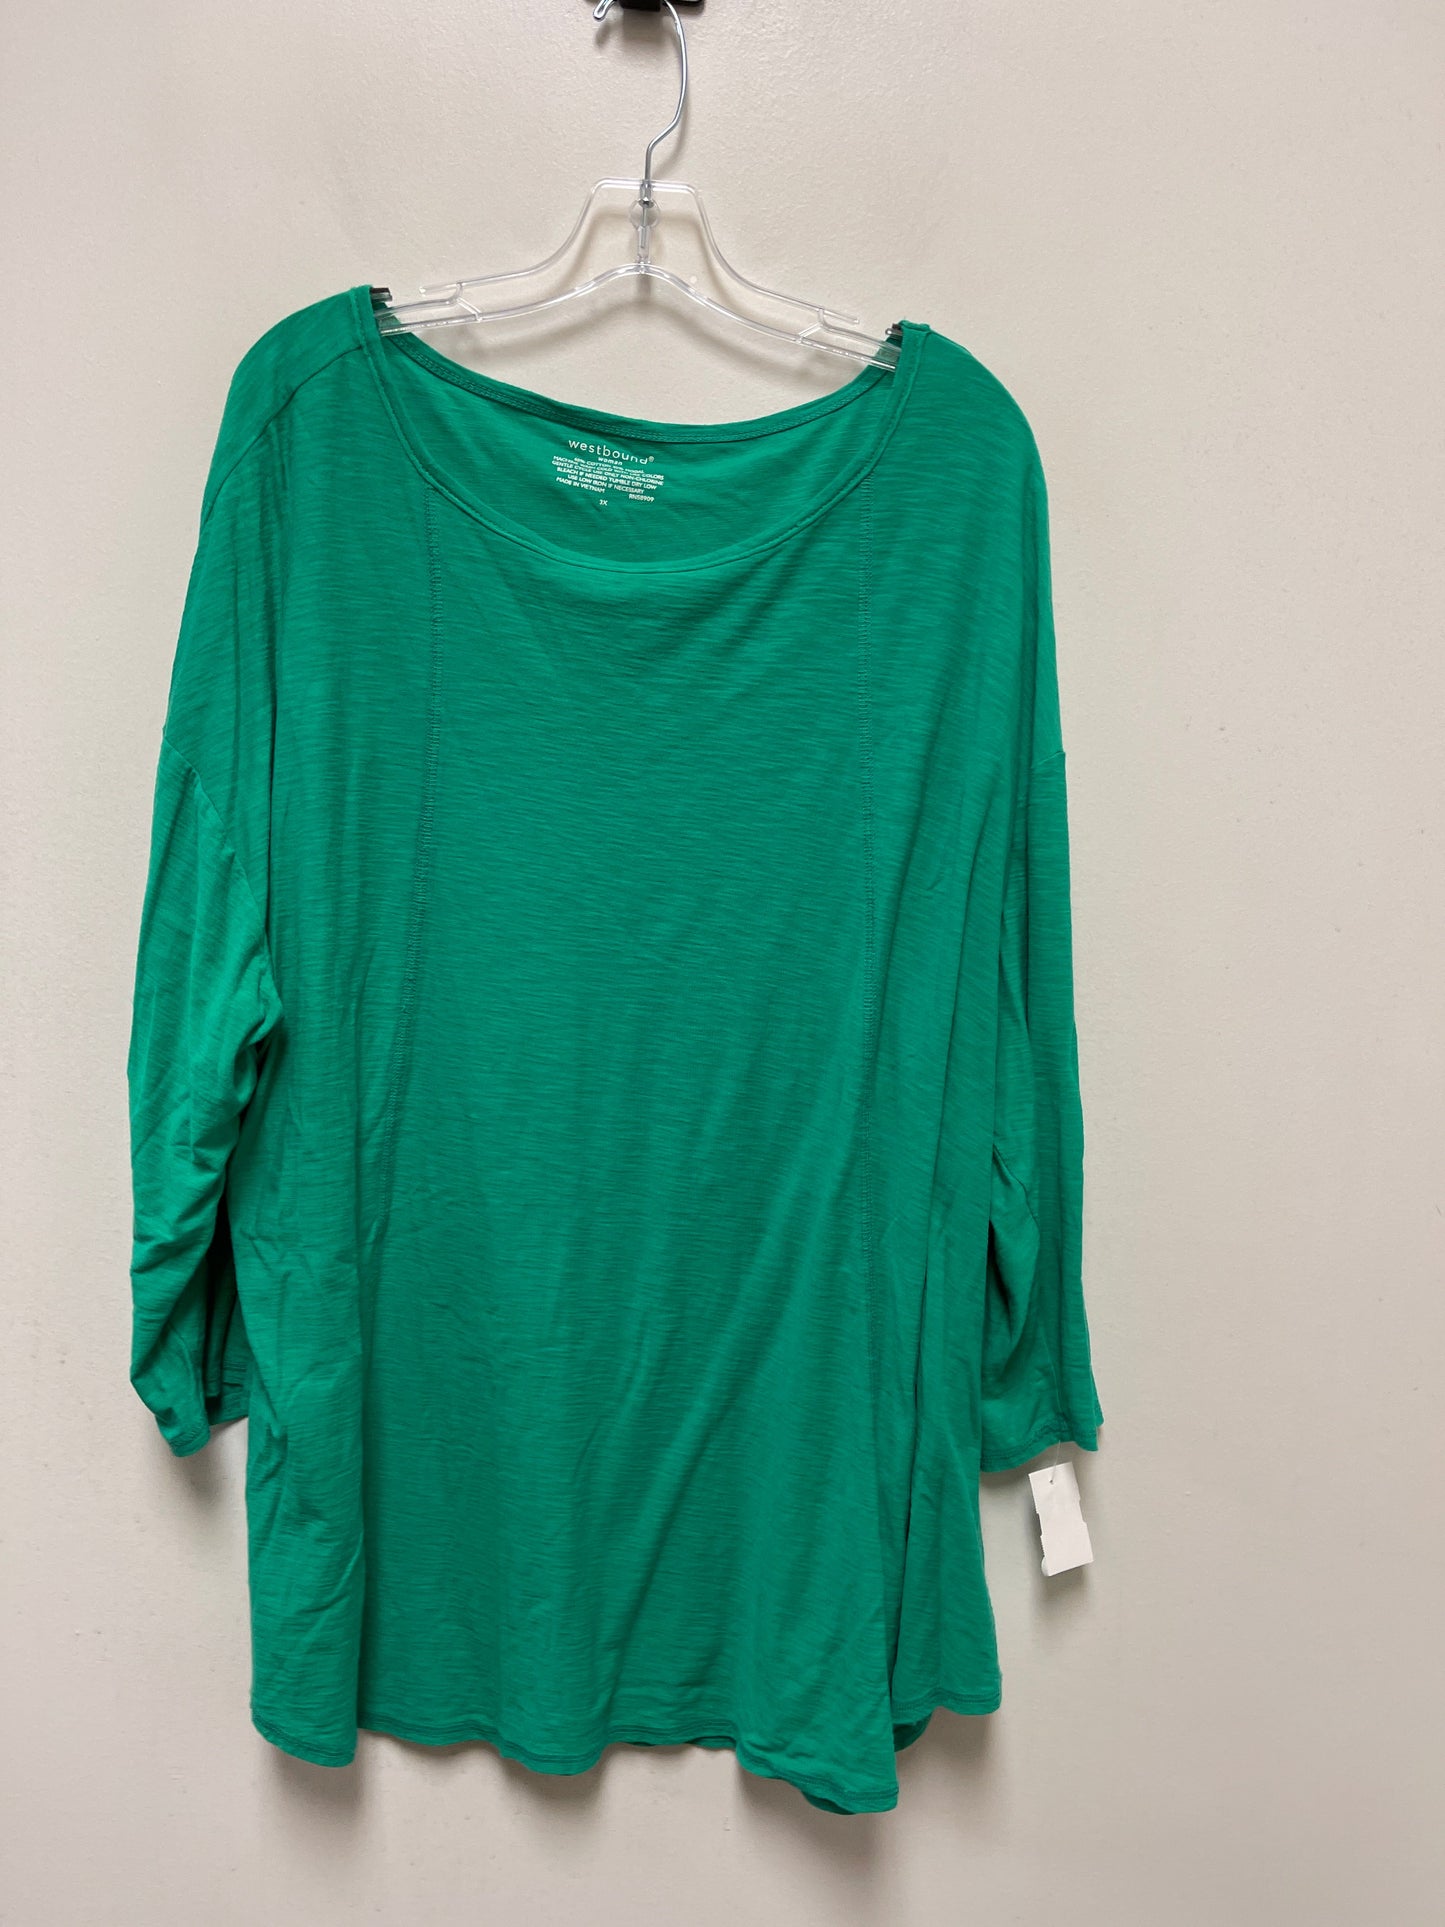 Green Top Long Sleeve West Bound, Size 3x